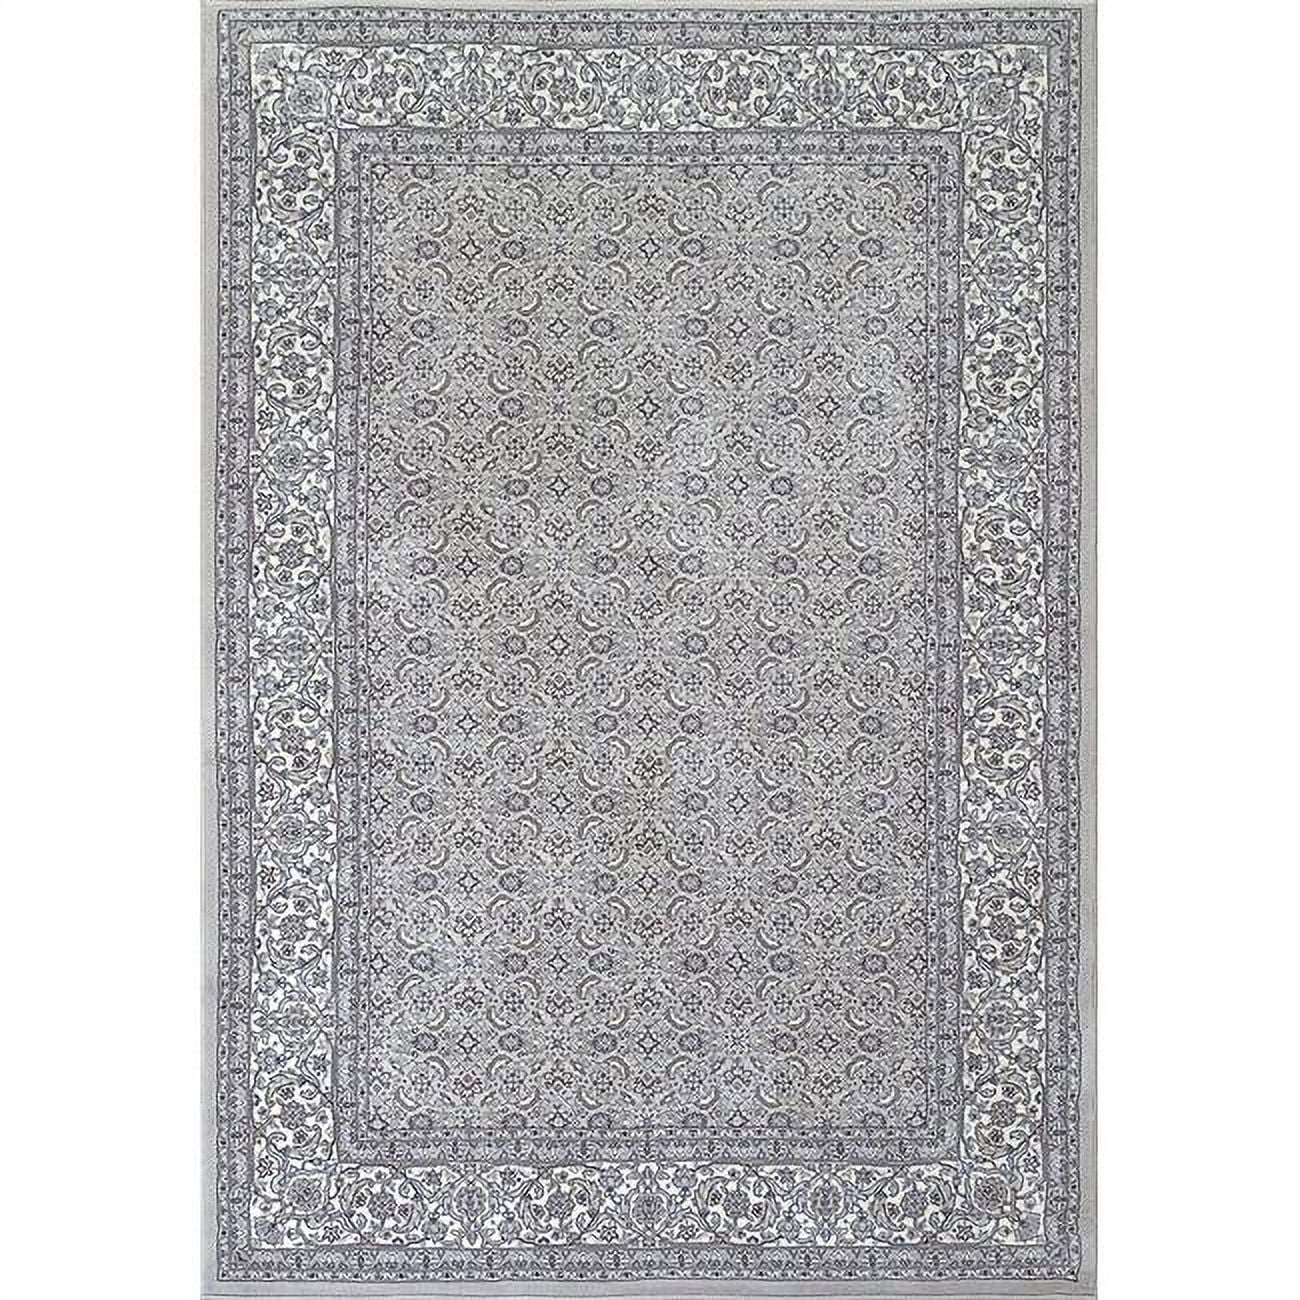 Picture of Dynamic Rugs AN212570119666 2 ft. 2 in. x 11 ft. Ancient 57011 Rectangle Traditional Rug - 9666 Soft Grey & Cream